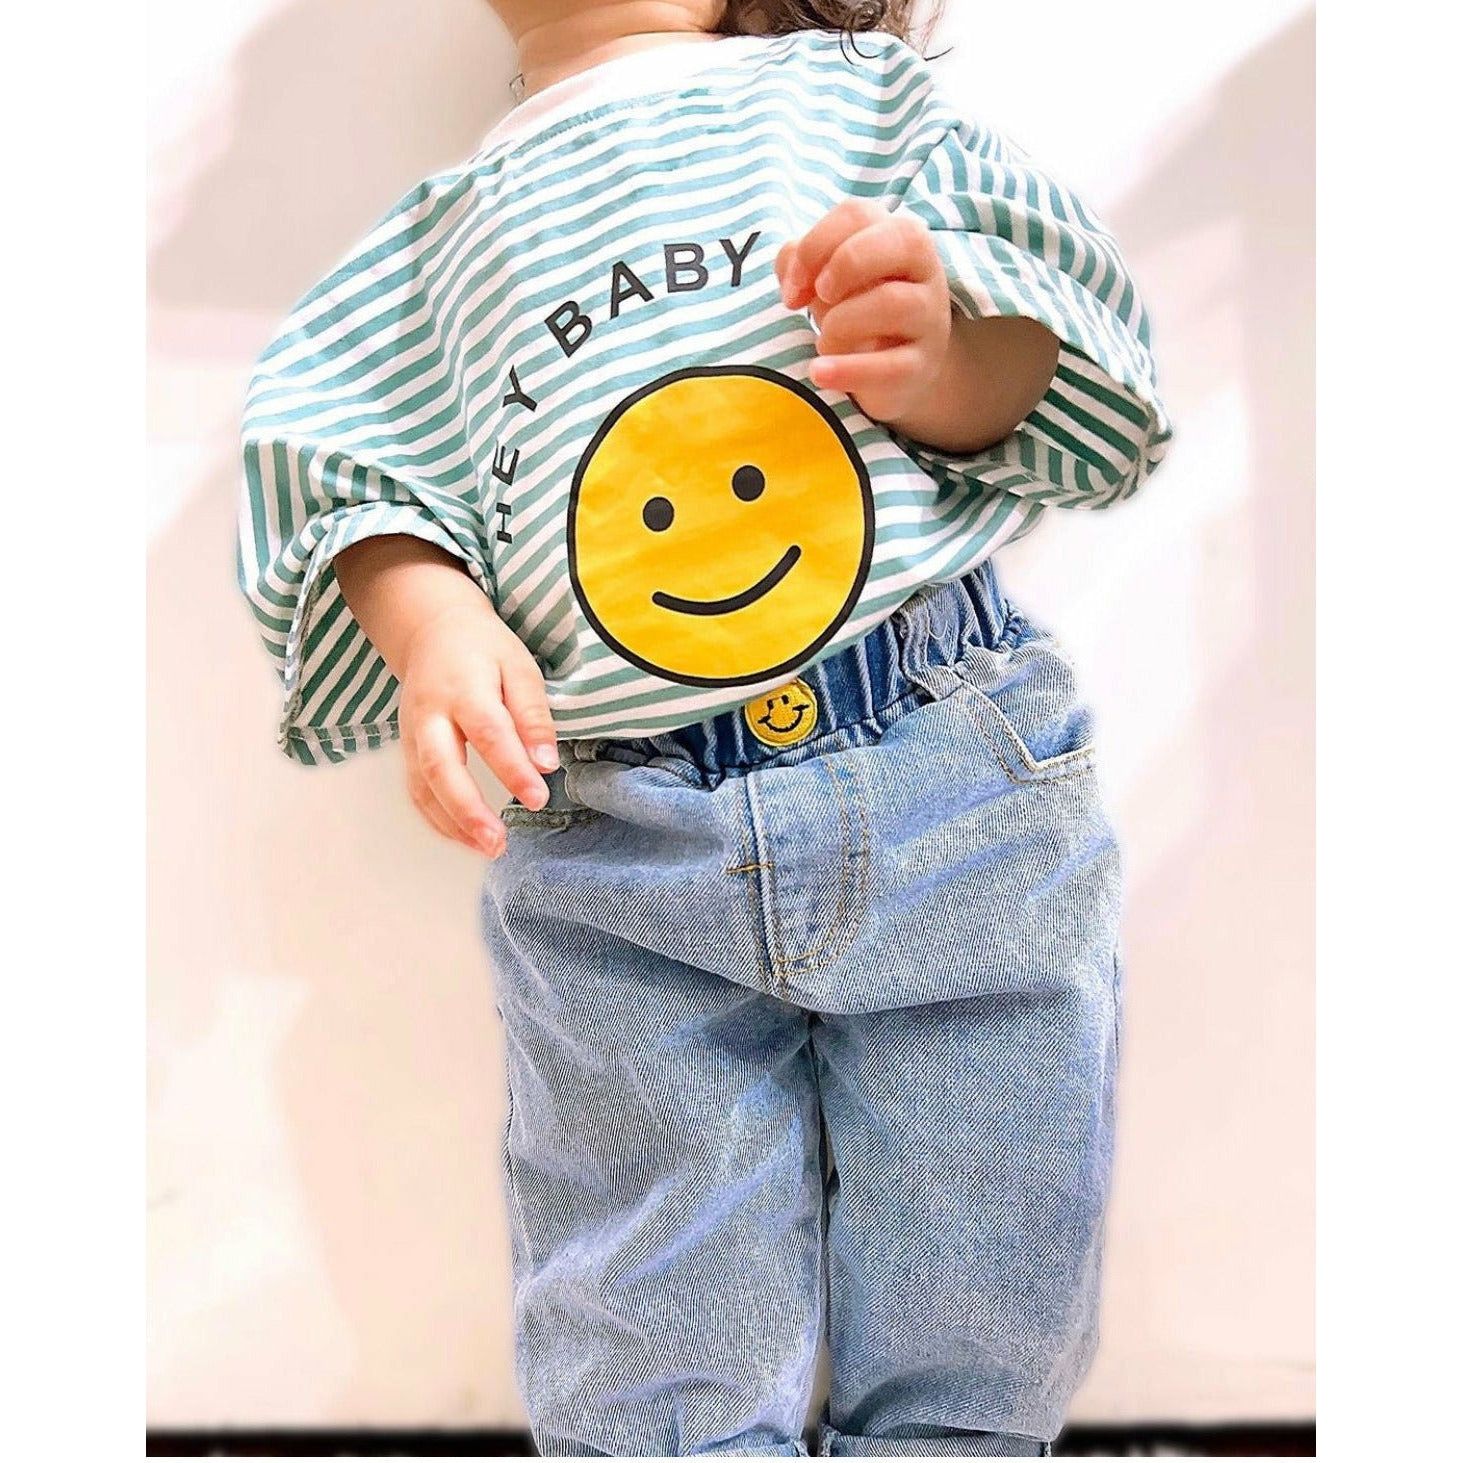 Baby boy in blue striped sweatshirt romper with smiley face